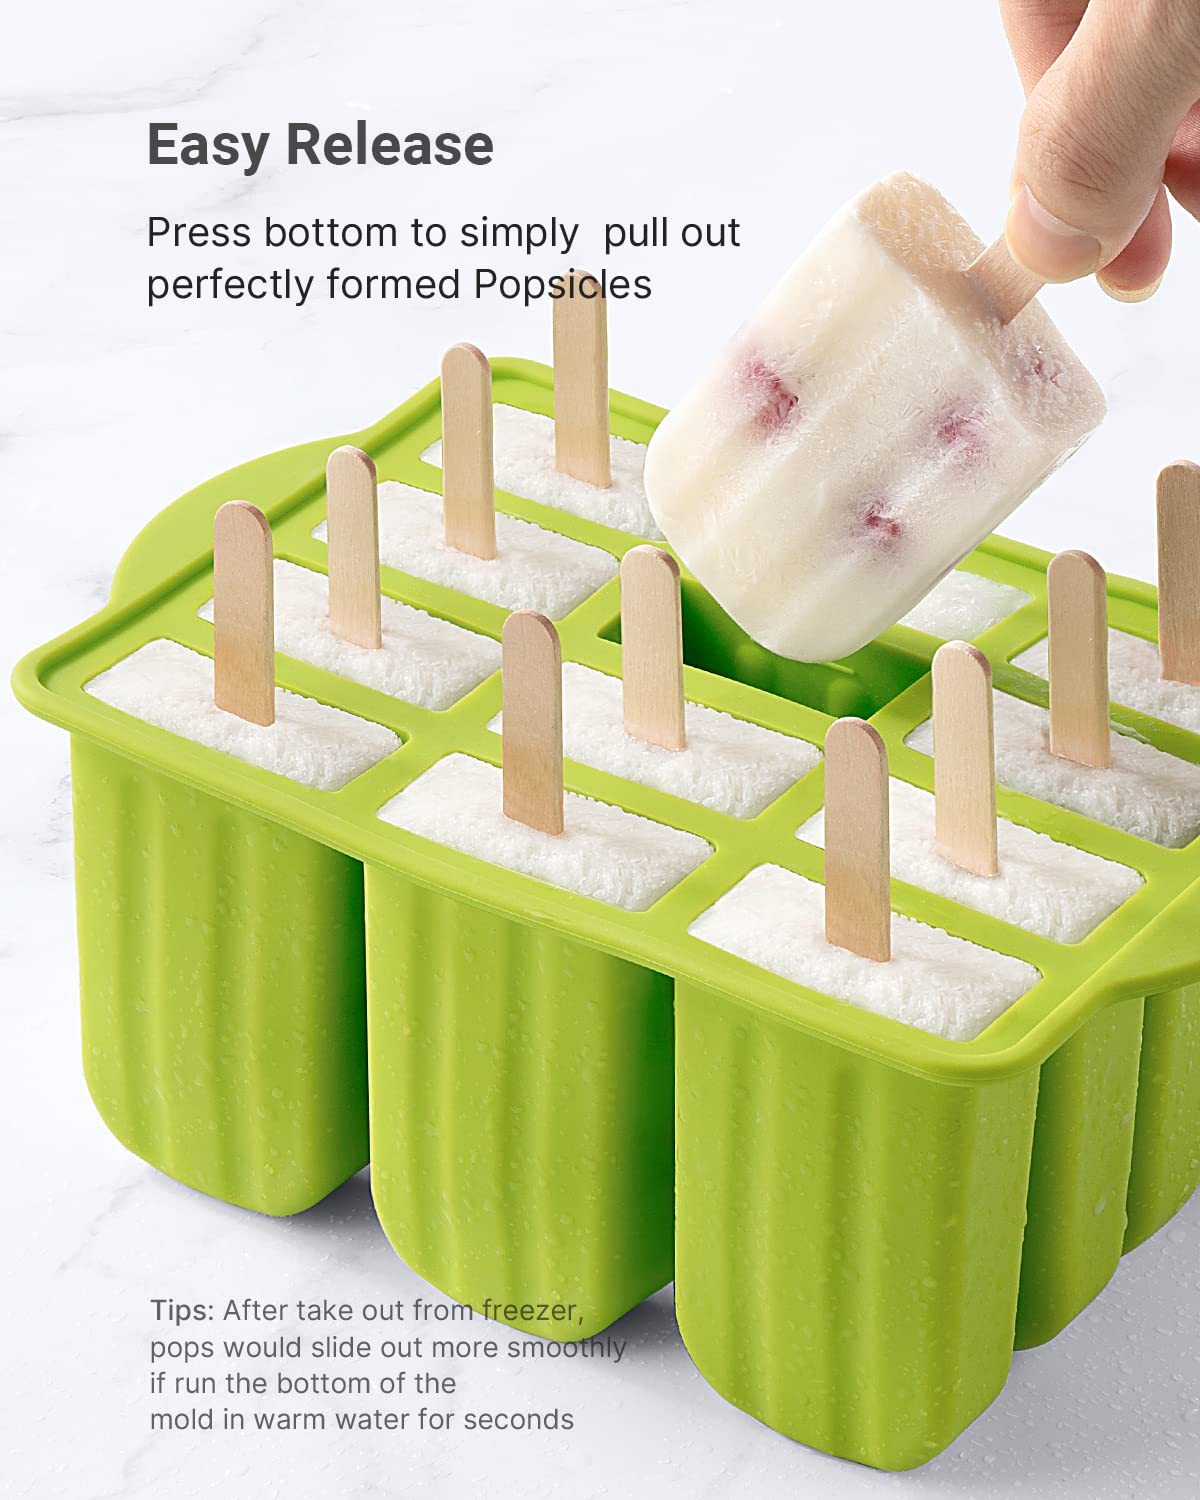 Windfall Popsicle 6/8 Cavity Molds Ice Pop Makers Ice Pop Molds Ice Bar Maker Plastic Popsicle Mold, Kids Ice Cream Tray Holder Lolly Pops, Kitchen